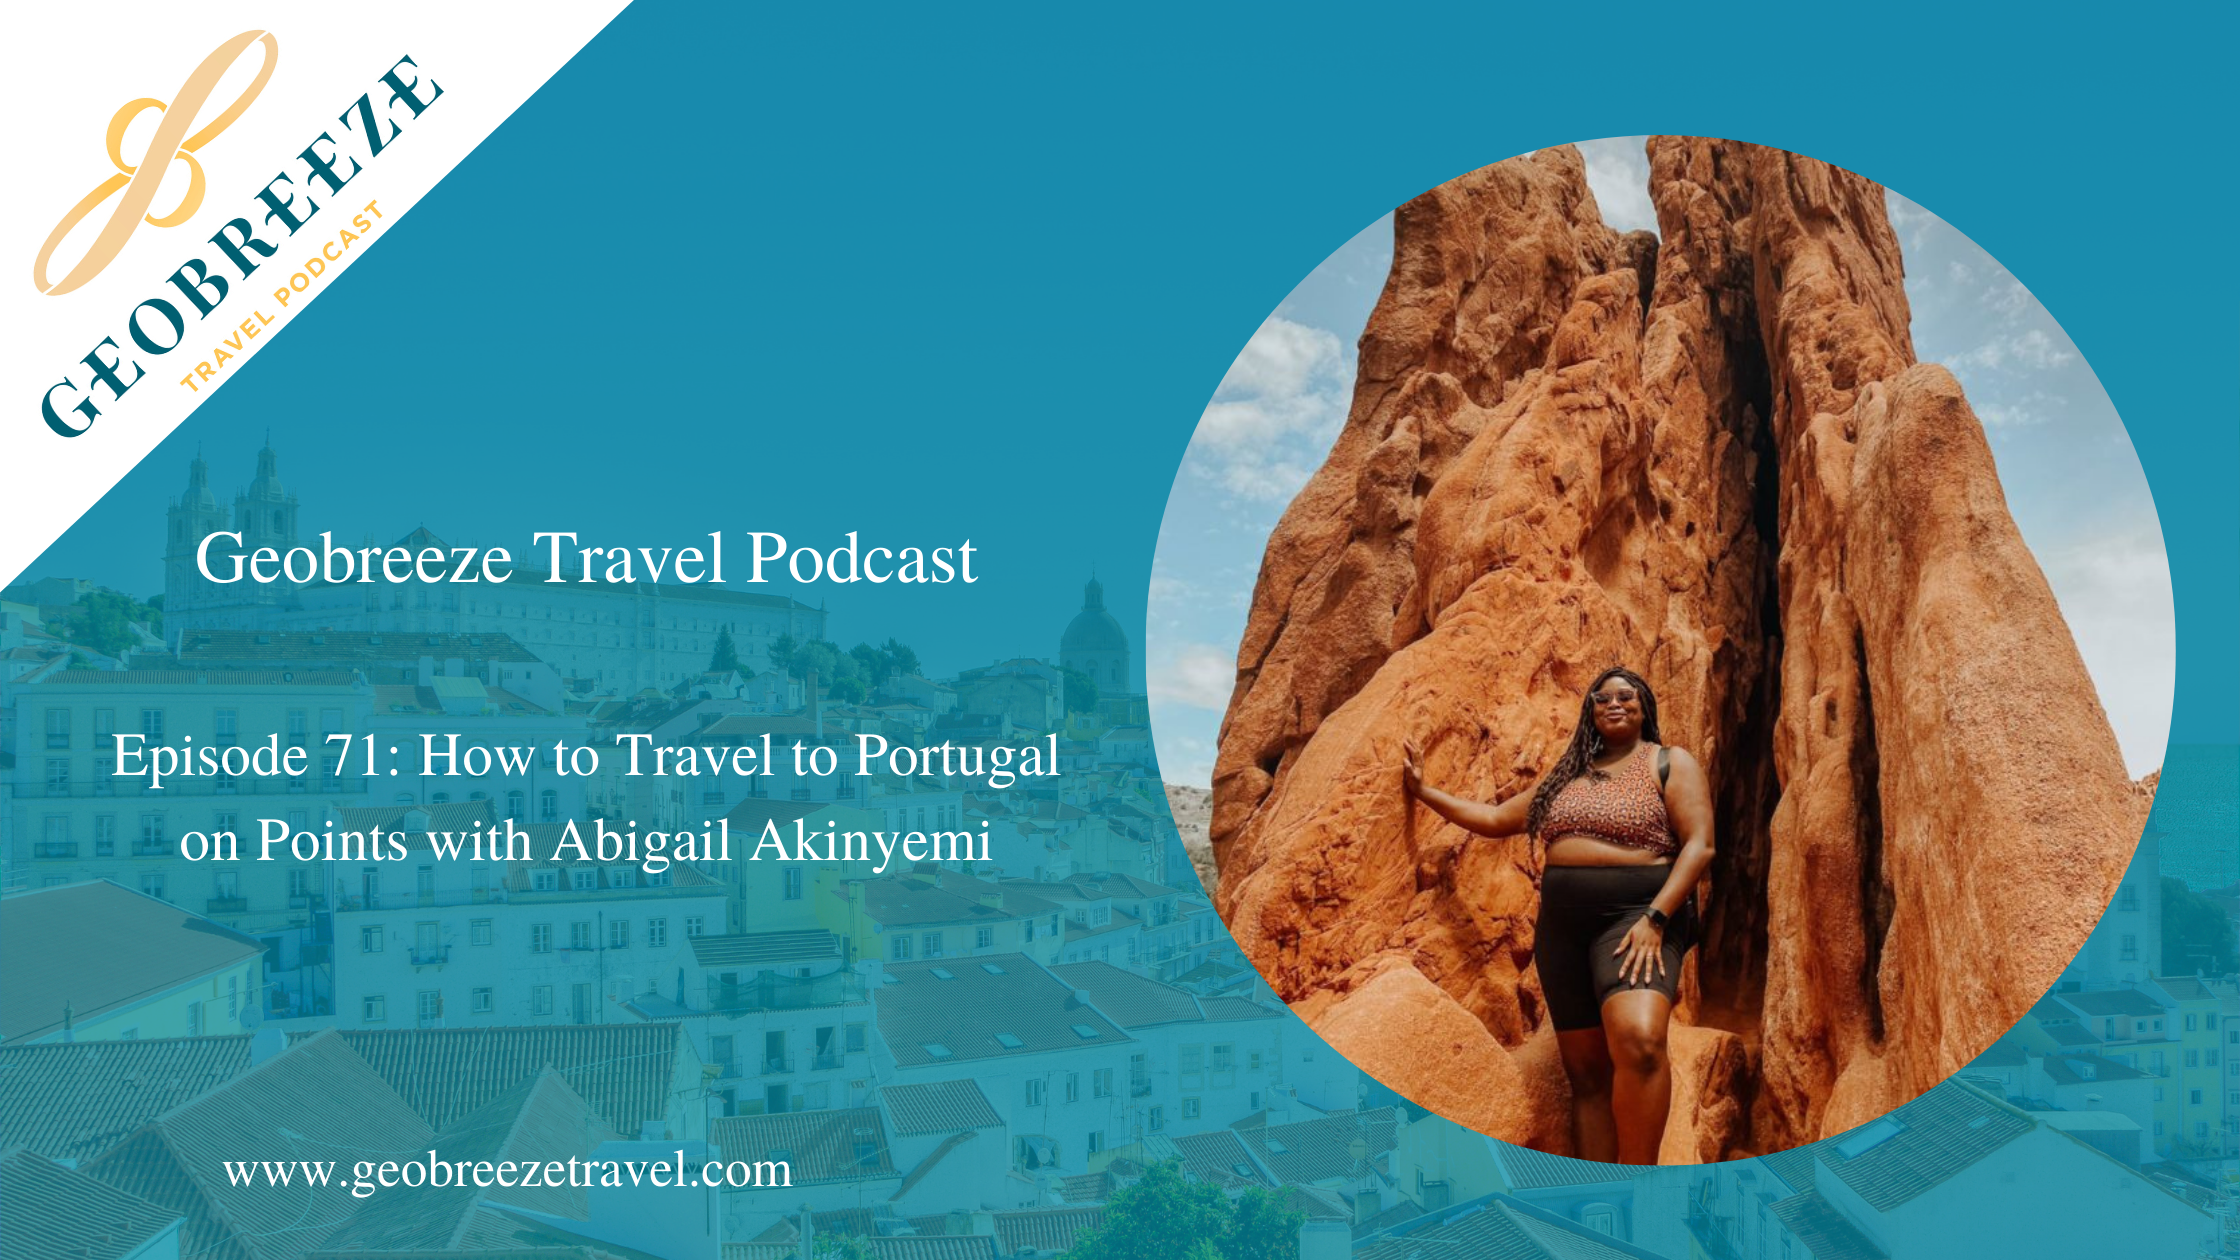 Episode 71: How to Travel to Portugal on Points with Abigail Akinyemi